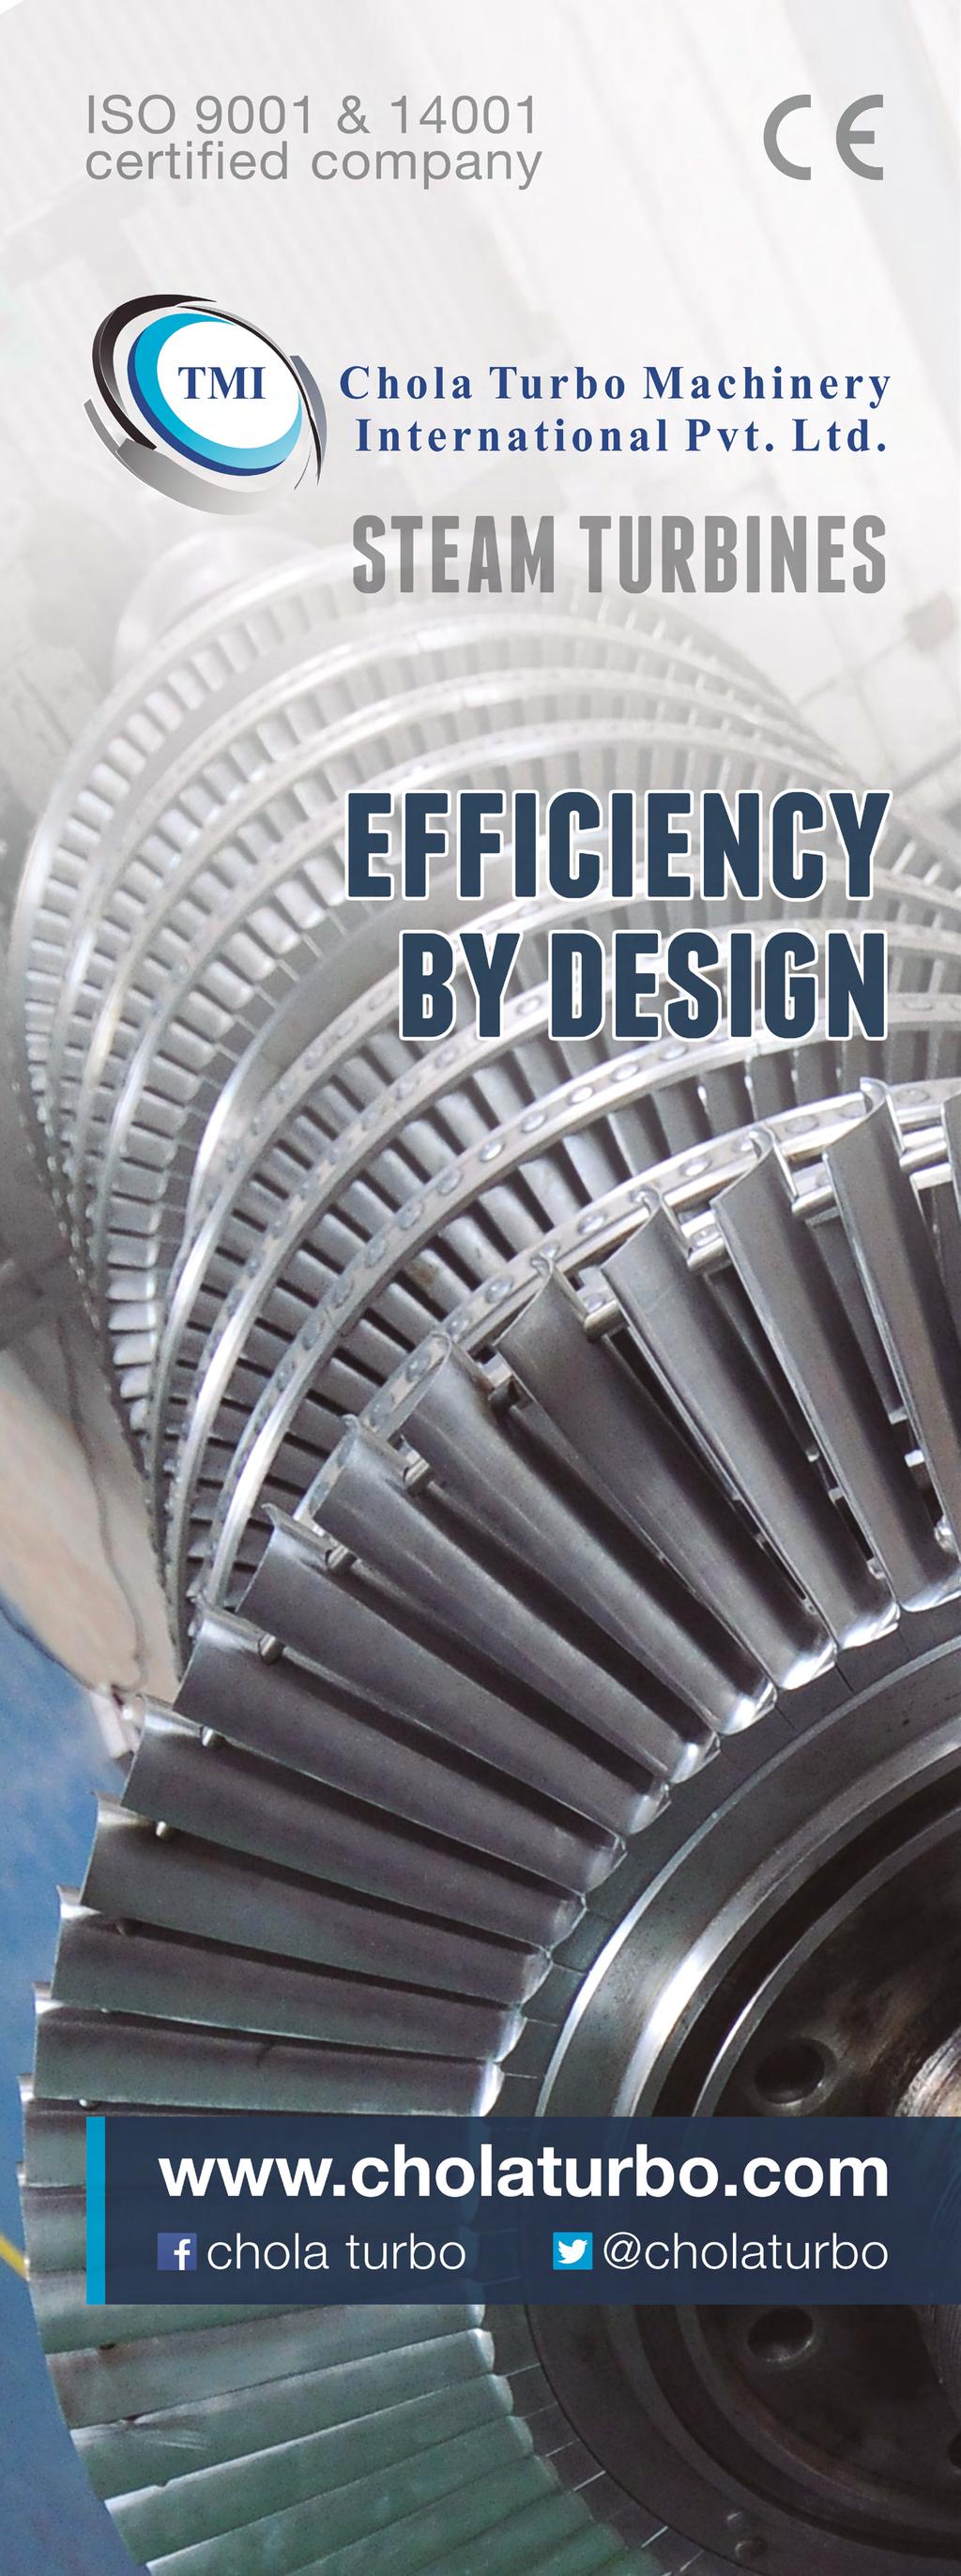 Steam Turbine Solutions Unique Turbine Designs Optimized For Energy Efficiency And Power Recovery 03 04 05 06 Unique Turbine Designs Optimized For Energy Efficiency Most innovative turbine features